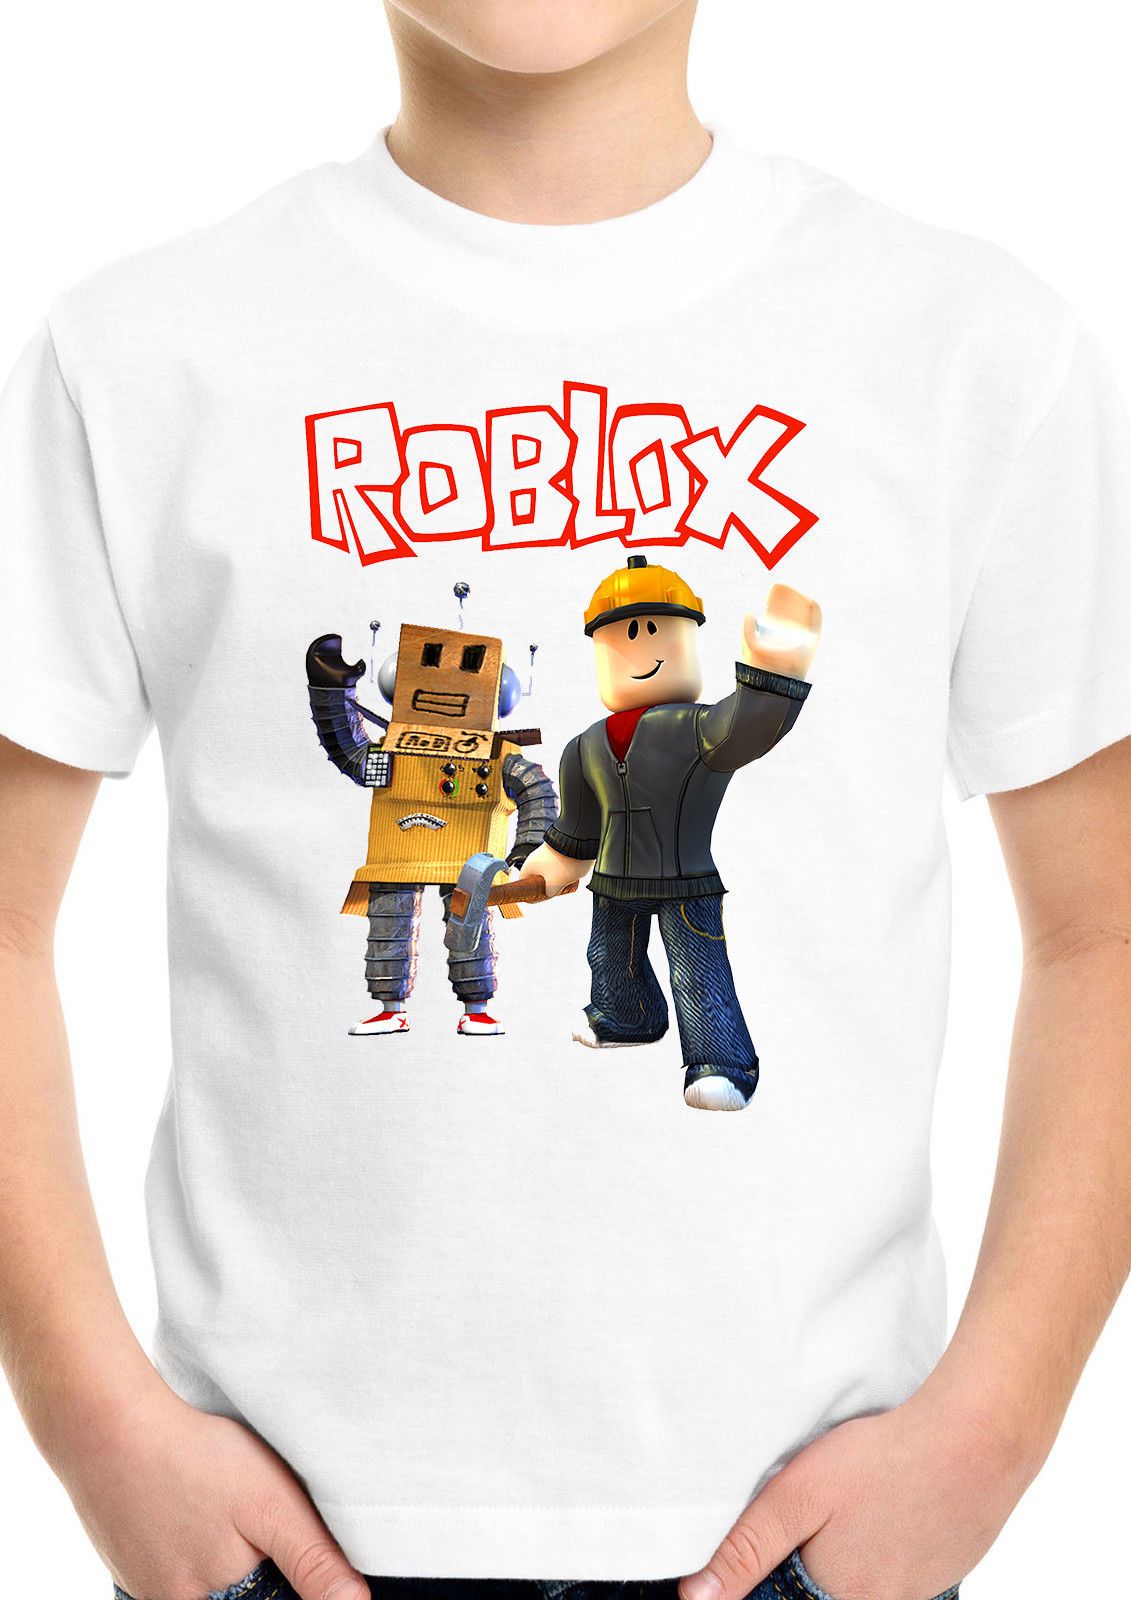 Can You Make Your Own Roblox Clothes For Free